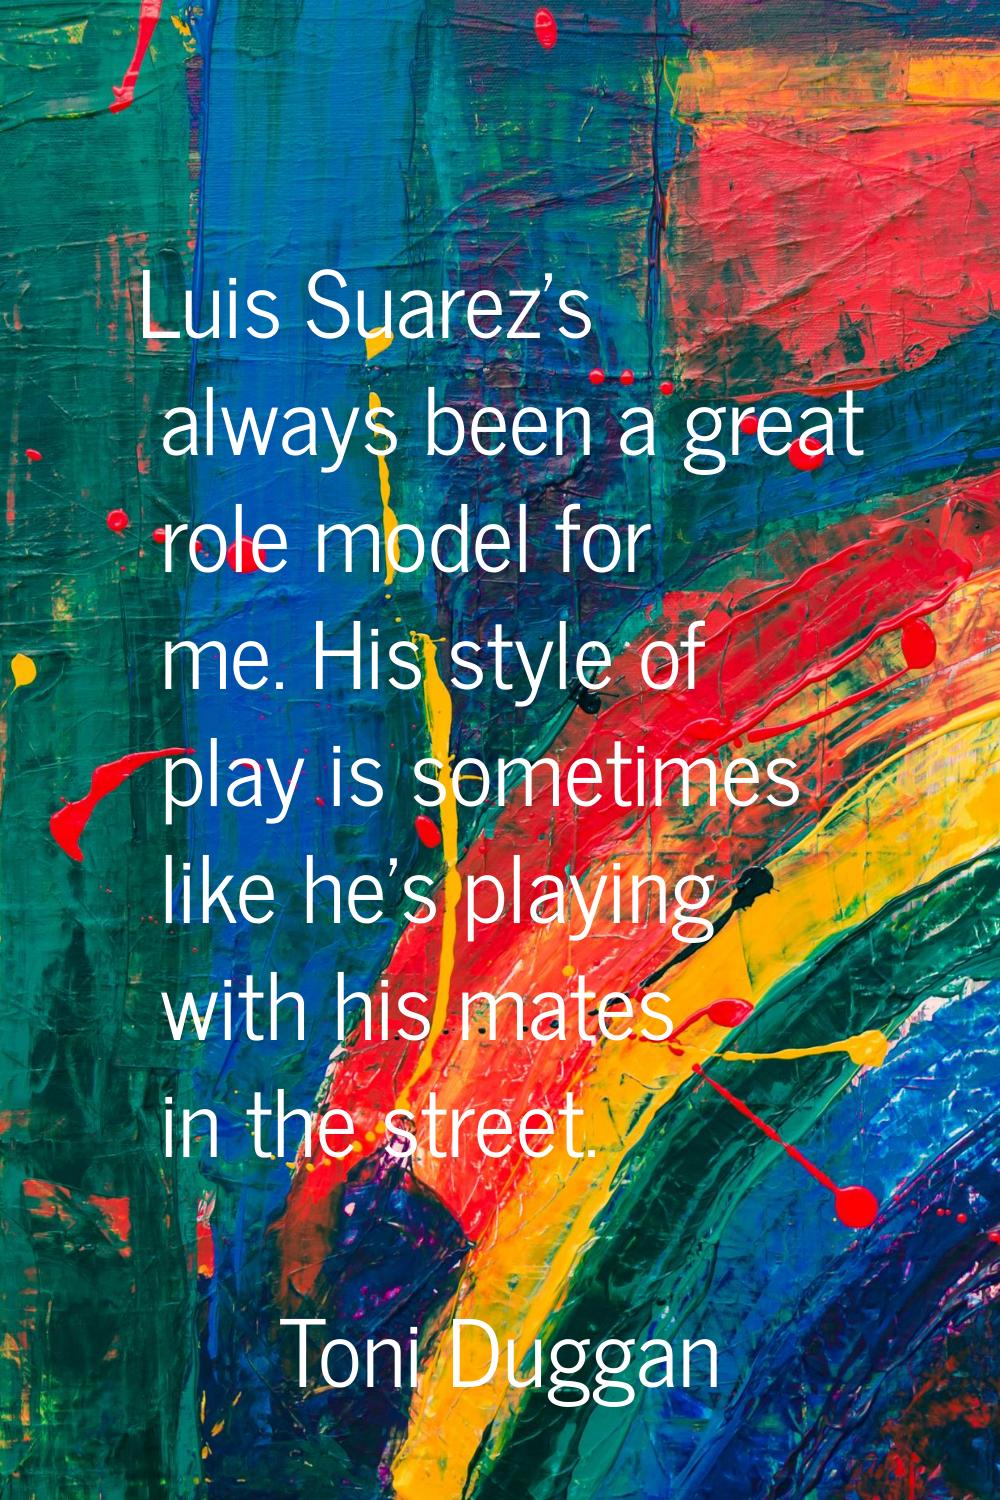 Luis Suarez's always been a great role model for me. His style of play is sometimes like he's playi